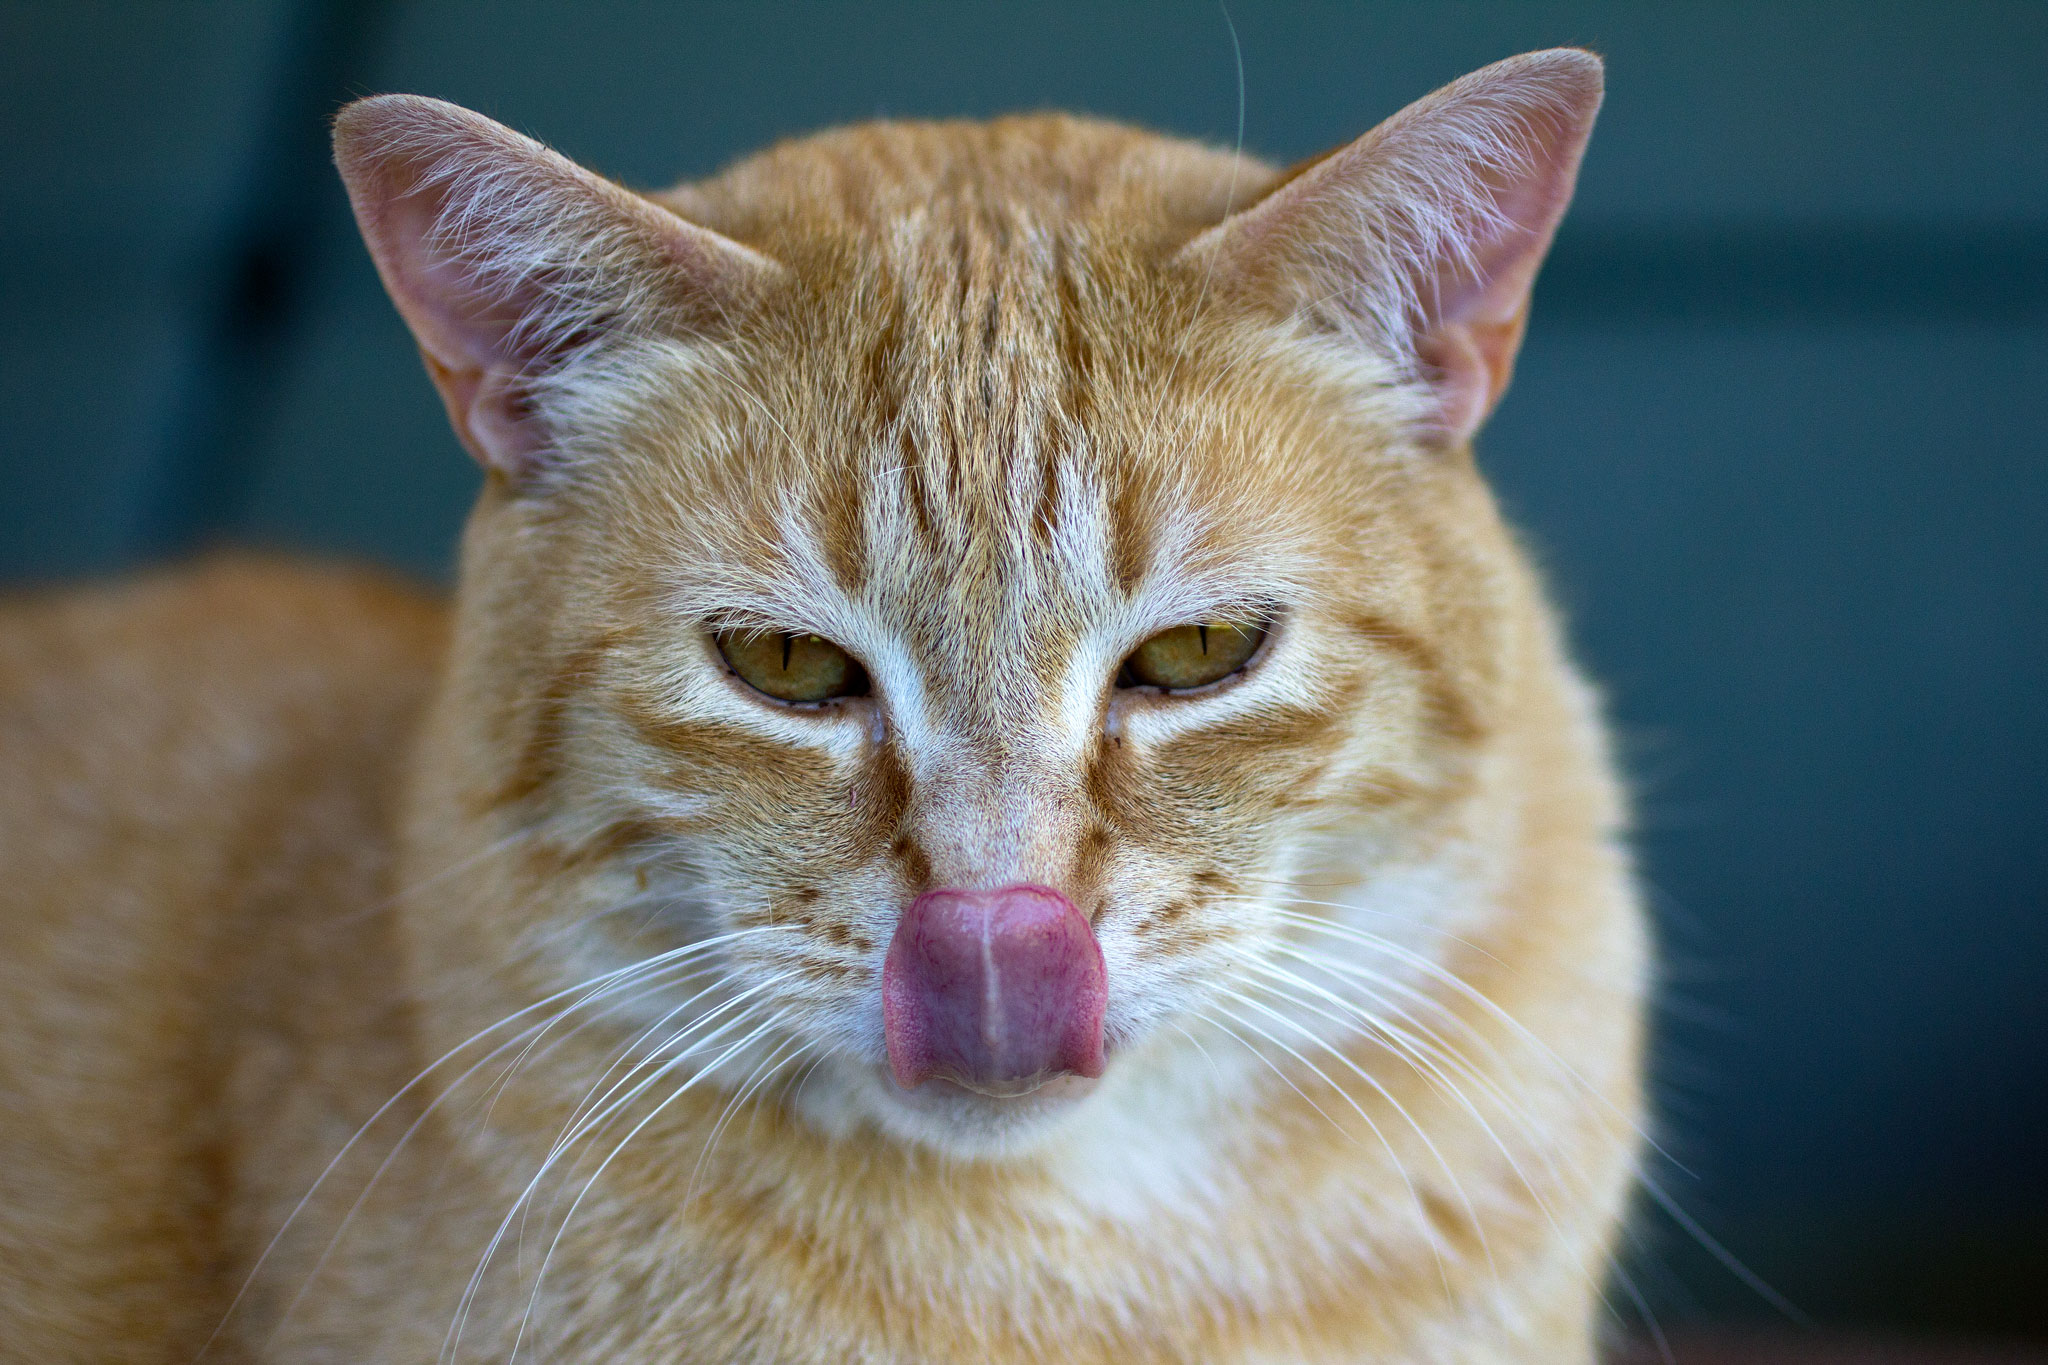 Why Cats Lick Plastic, and Other Odd Behaviors Explained